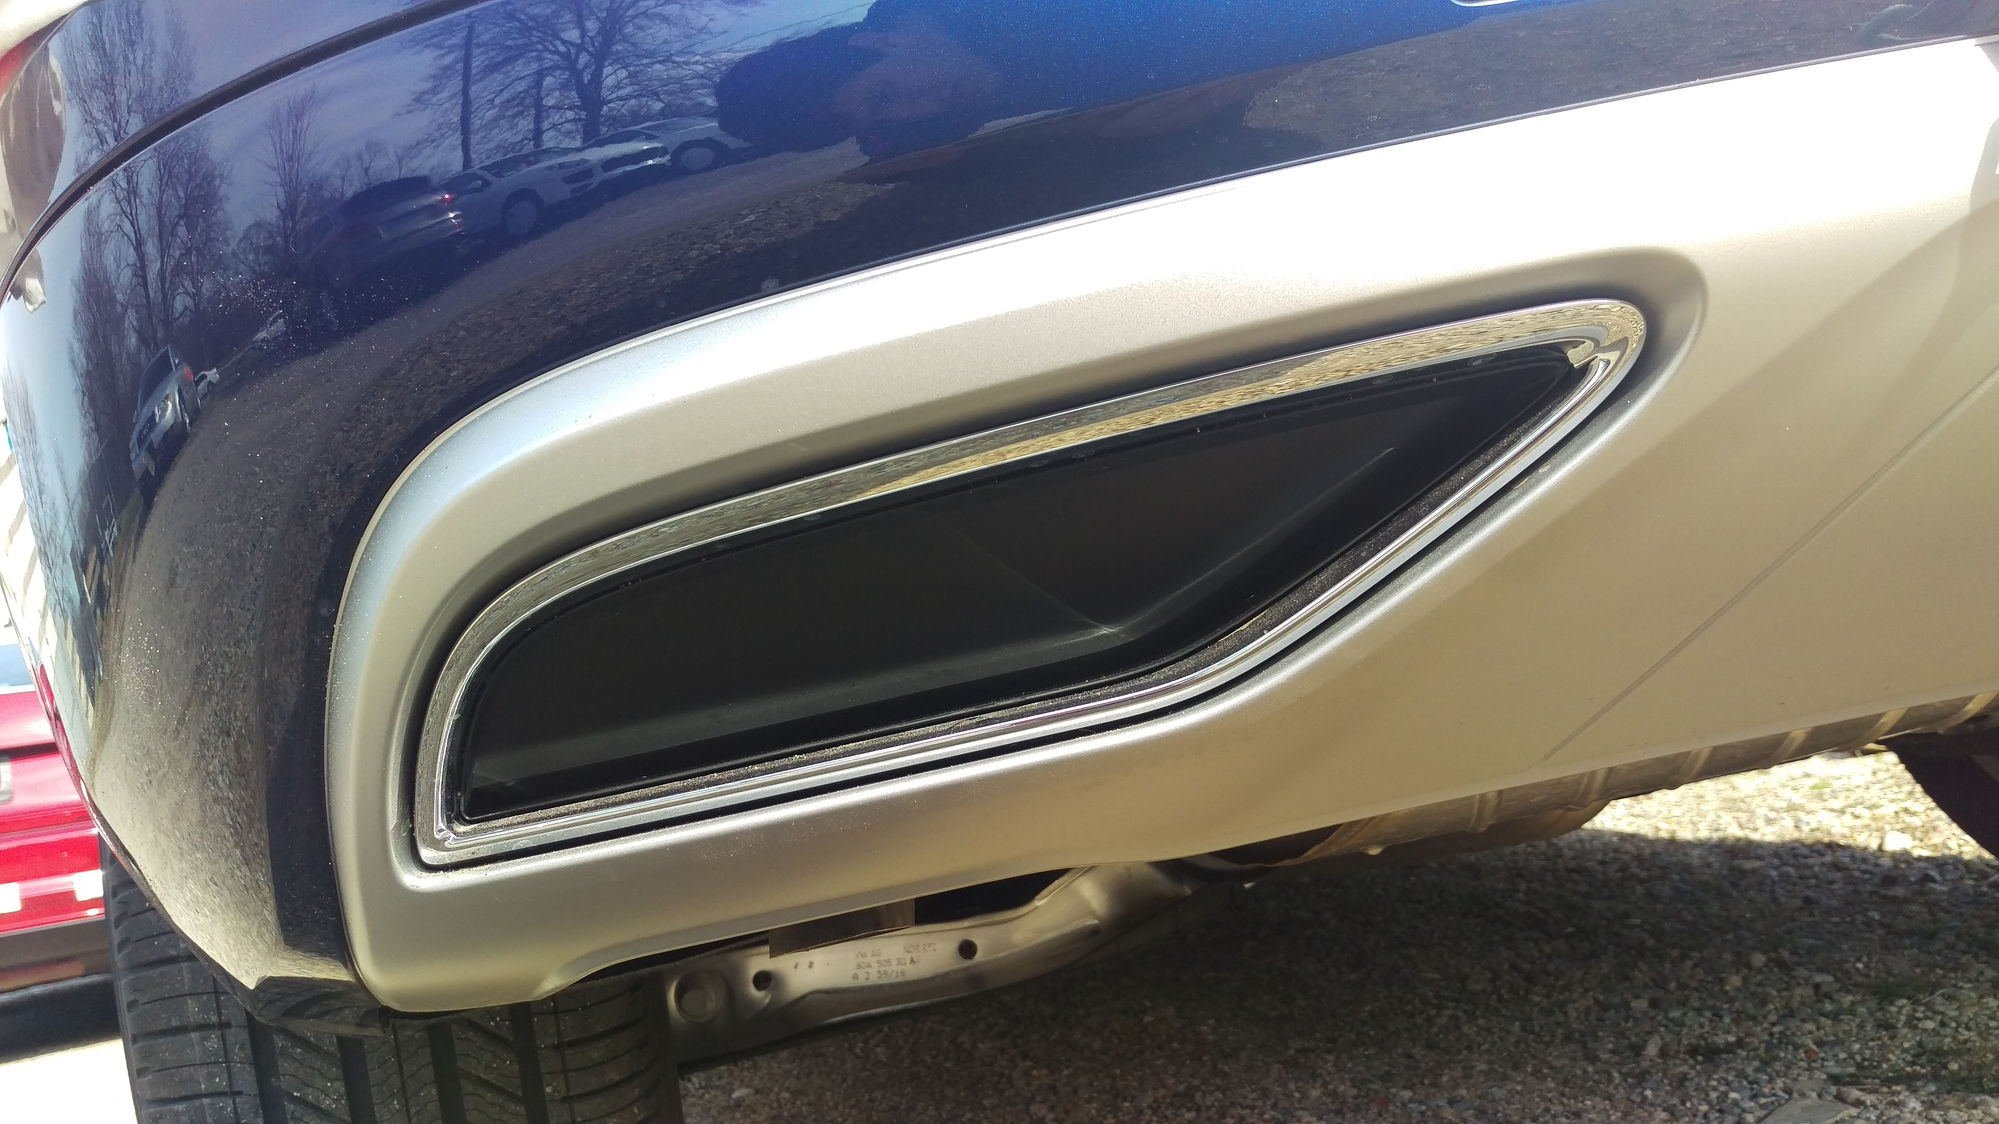 2018 Q5 Exhaust Tips are Definitely Fake - AudiWorld Forums